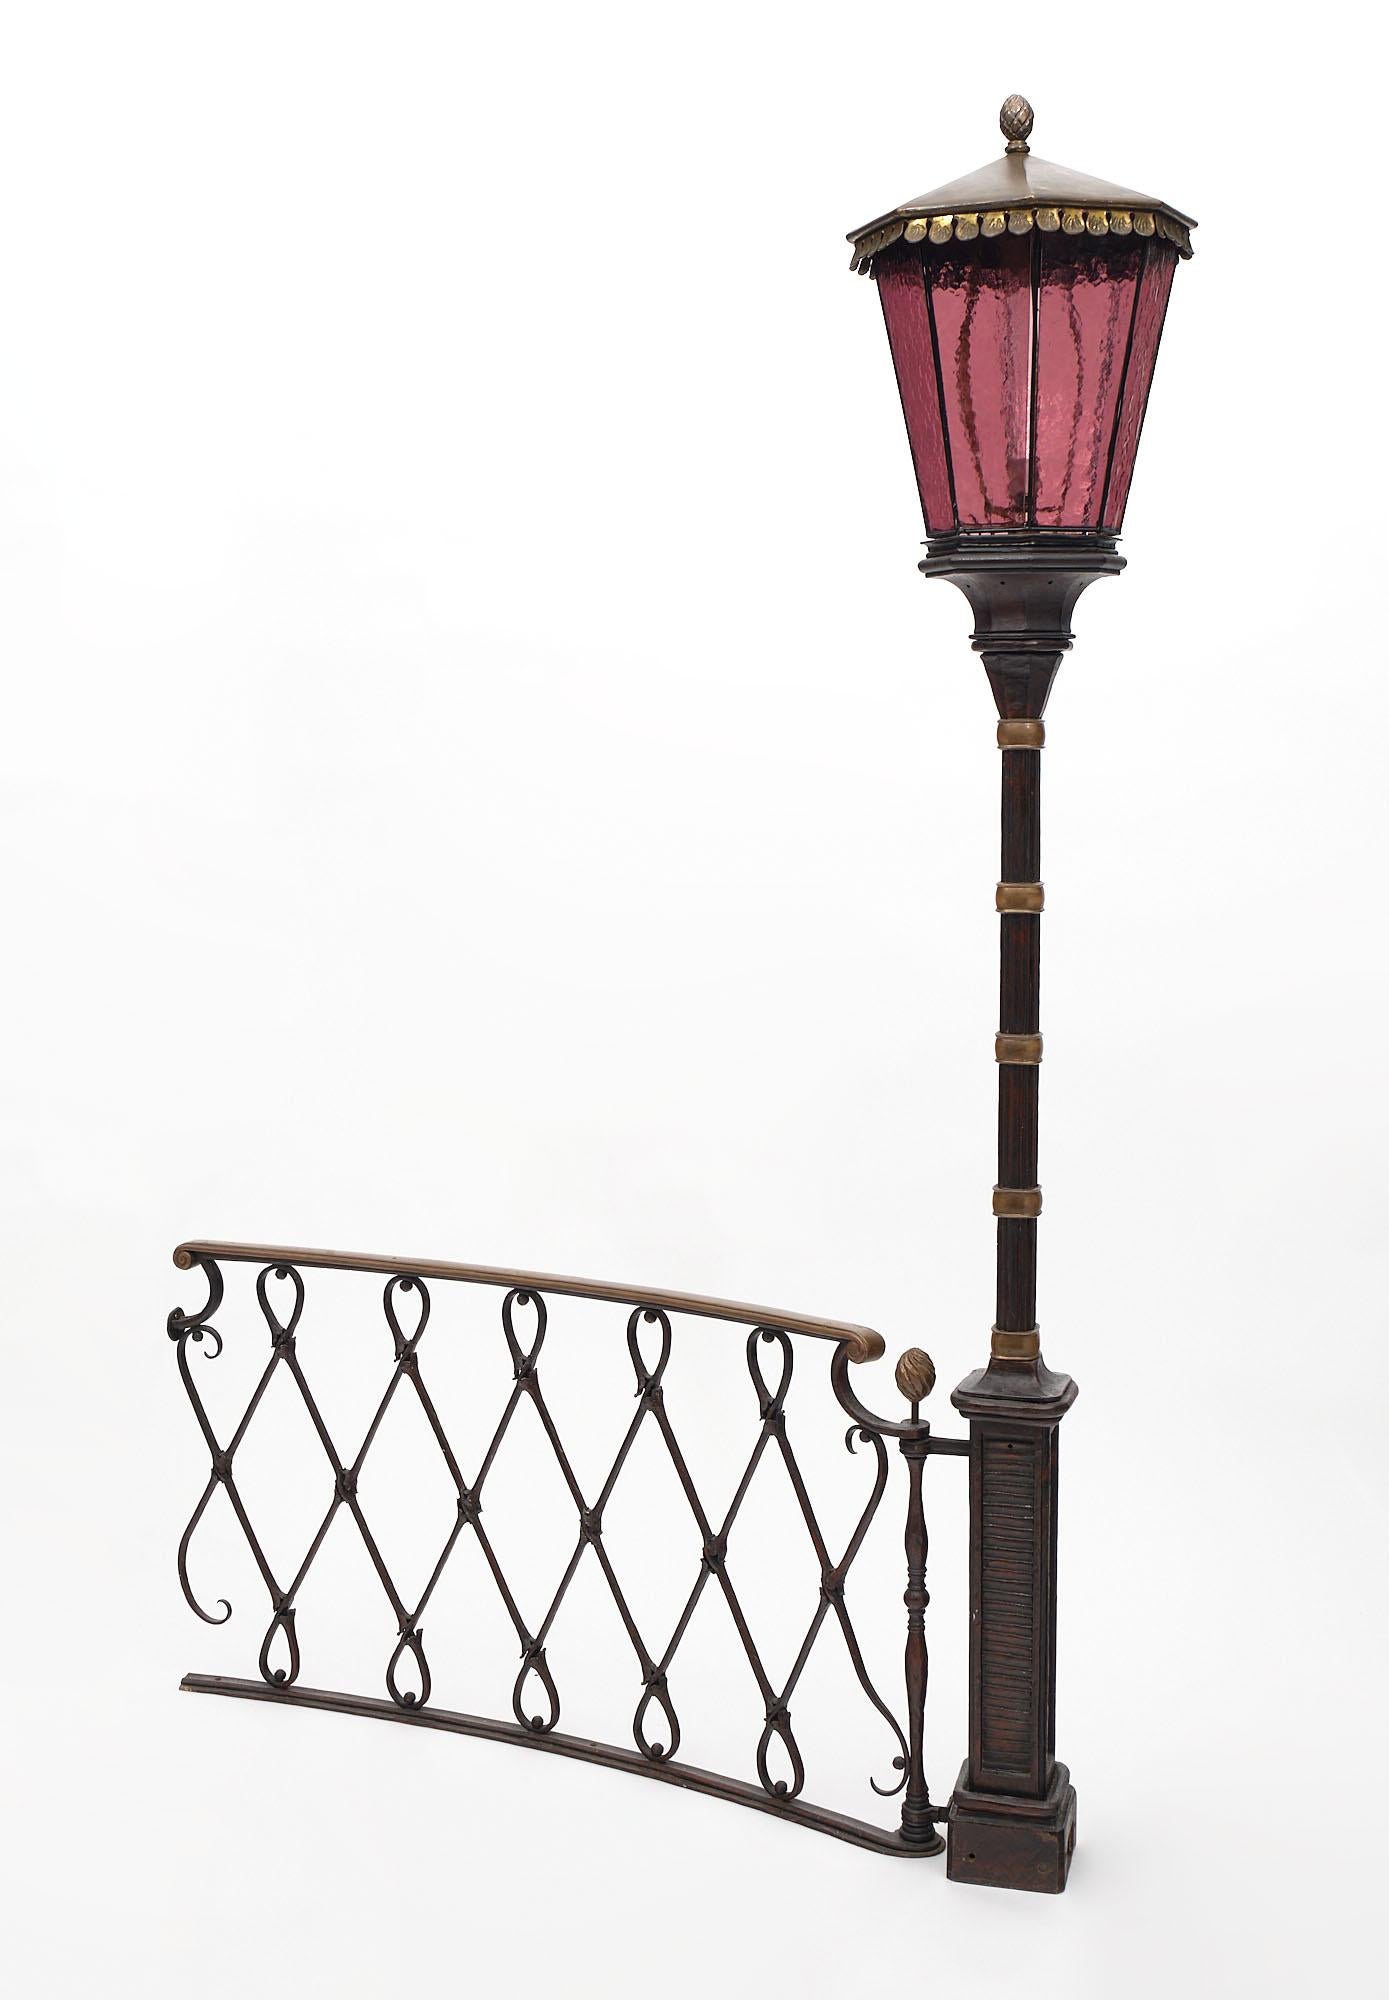 Important street lamp from France made of hand hammered wrought iron with patinated bronze details. This piece also features a wrought iron railing. It has a beautiful patina and very high quality craftsmanship in the manner of Diego Giacometti.